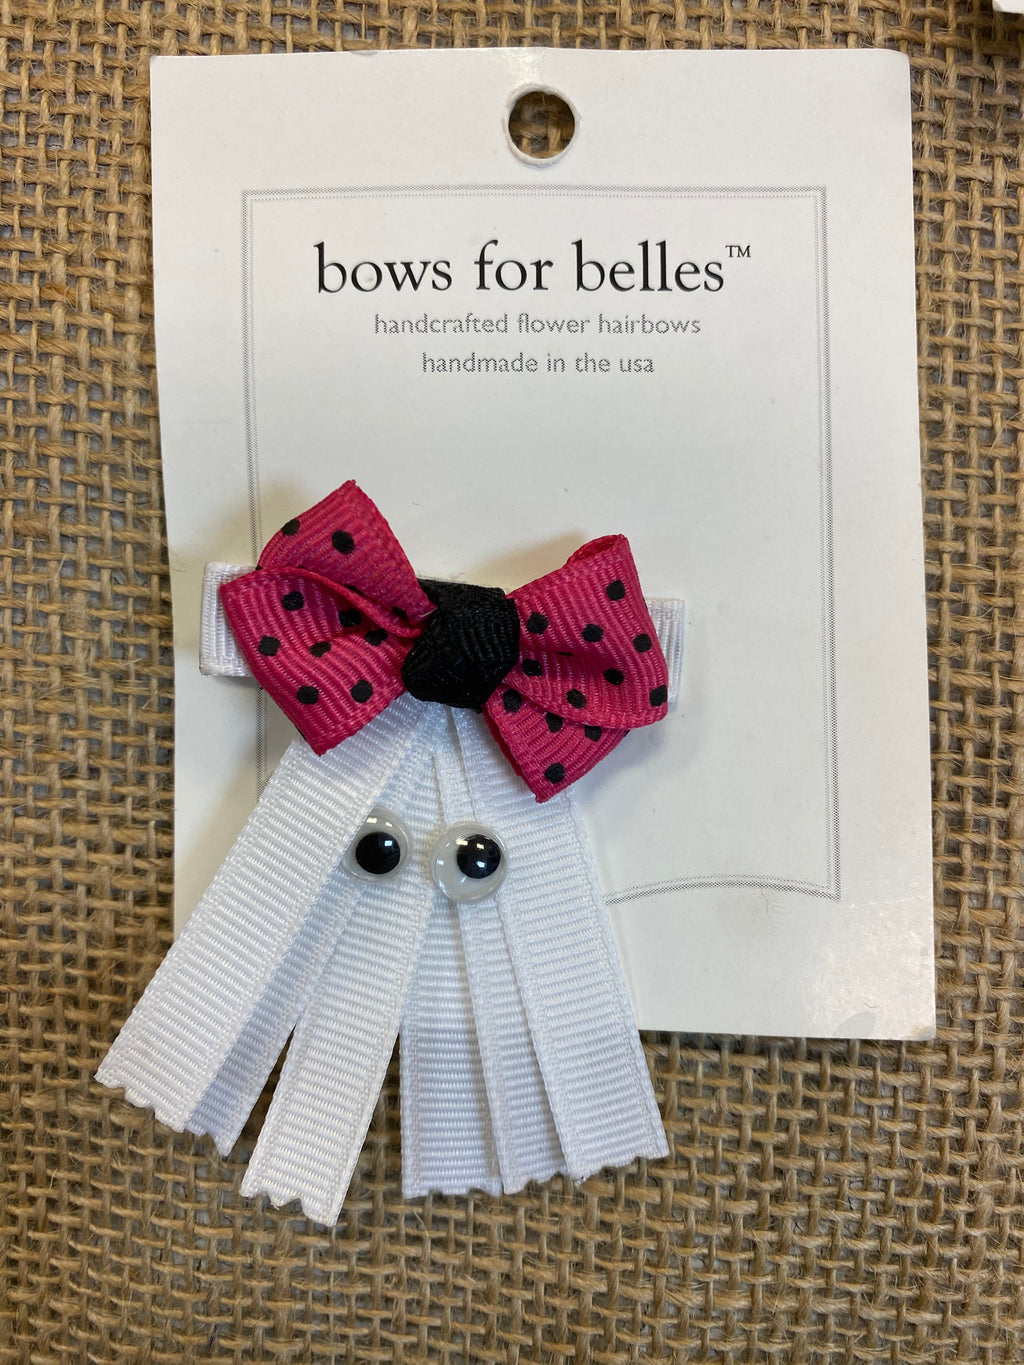 Bows for Belles ghost